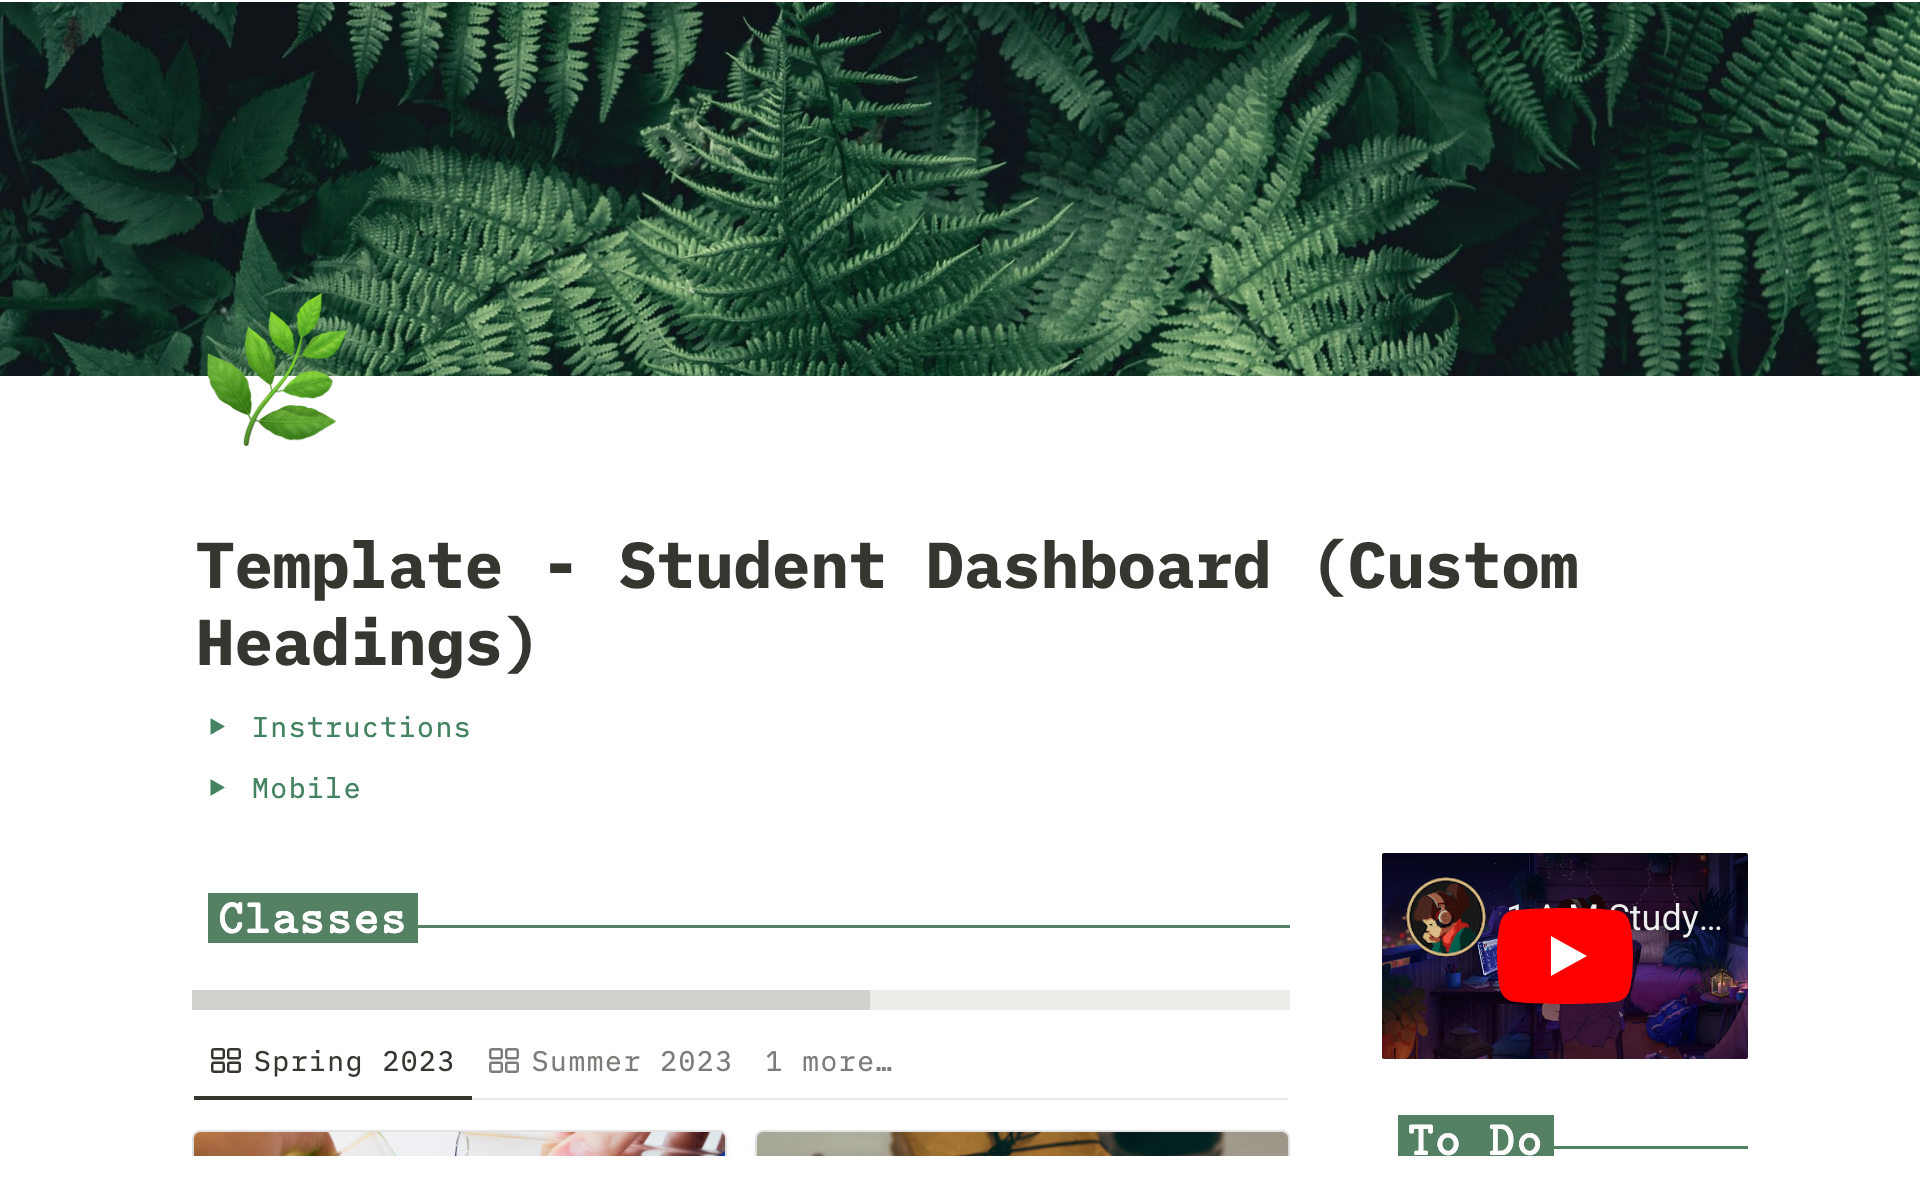 Organizes lecture notes, readings, assignments, and exams into one dashboard for students.